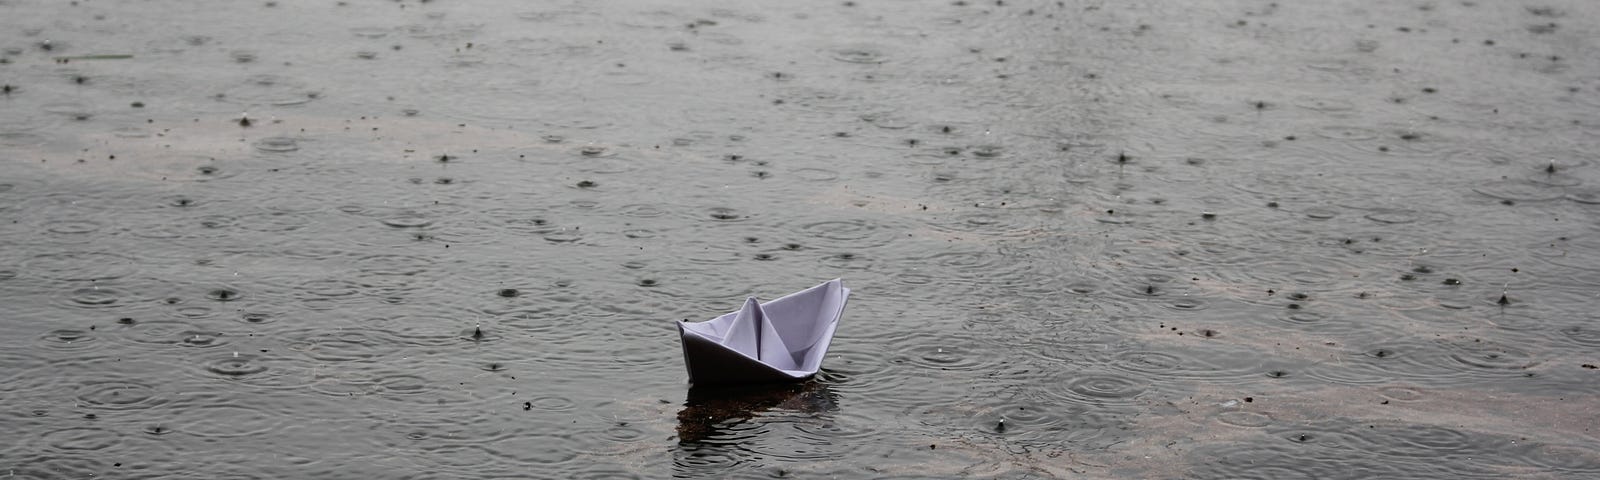 Photo of raindrops falling on water while a small paper boat bobs up and down.